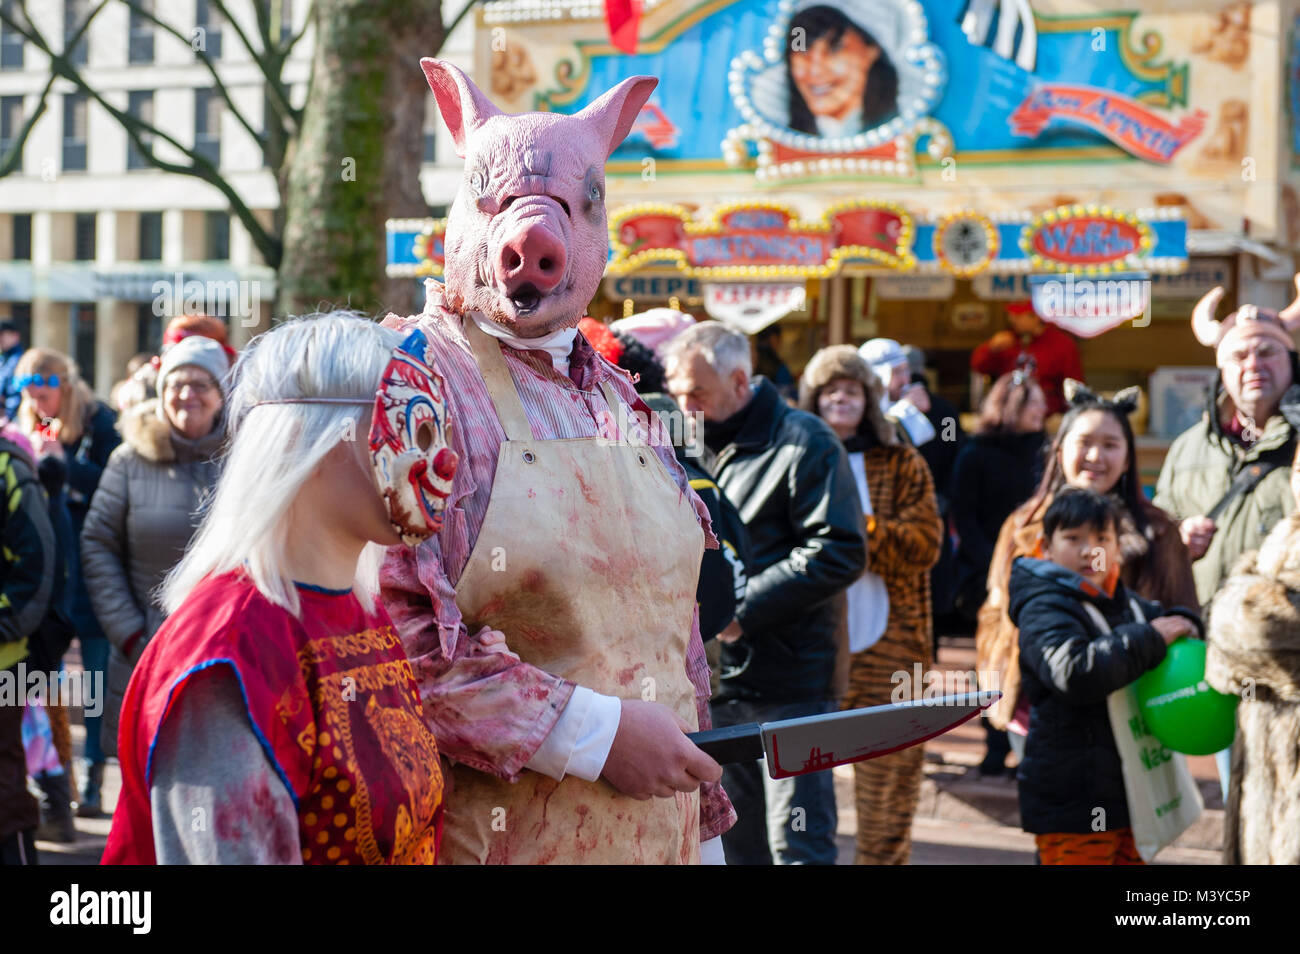 Düsseldorf, Germany, 12 February 2018. The Carnival events features more than 300 Carnival shows, balls, anniversaries, receptions and costume parties. The motto this season is ‘Jeck erst recht’ (Carnival more than ever). The Rose Monday Parade is the culmination of the celebration and gathers 5,000 participants that join the procession through the city. It featuring more than 30 music ensembles and elaborately built and decorated floats addressing cultural and political issues with a satirical, hilarious and controversial mood, such as the famous politically themed floats of Jacques Tilly. Stock Photo